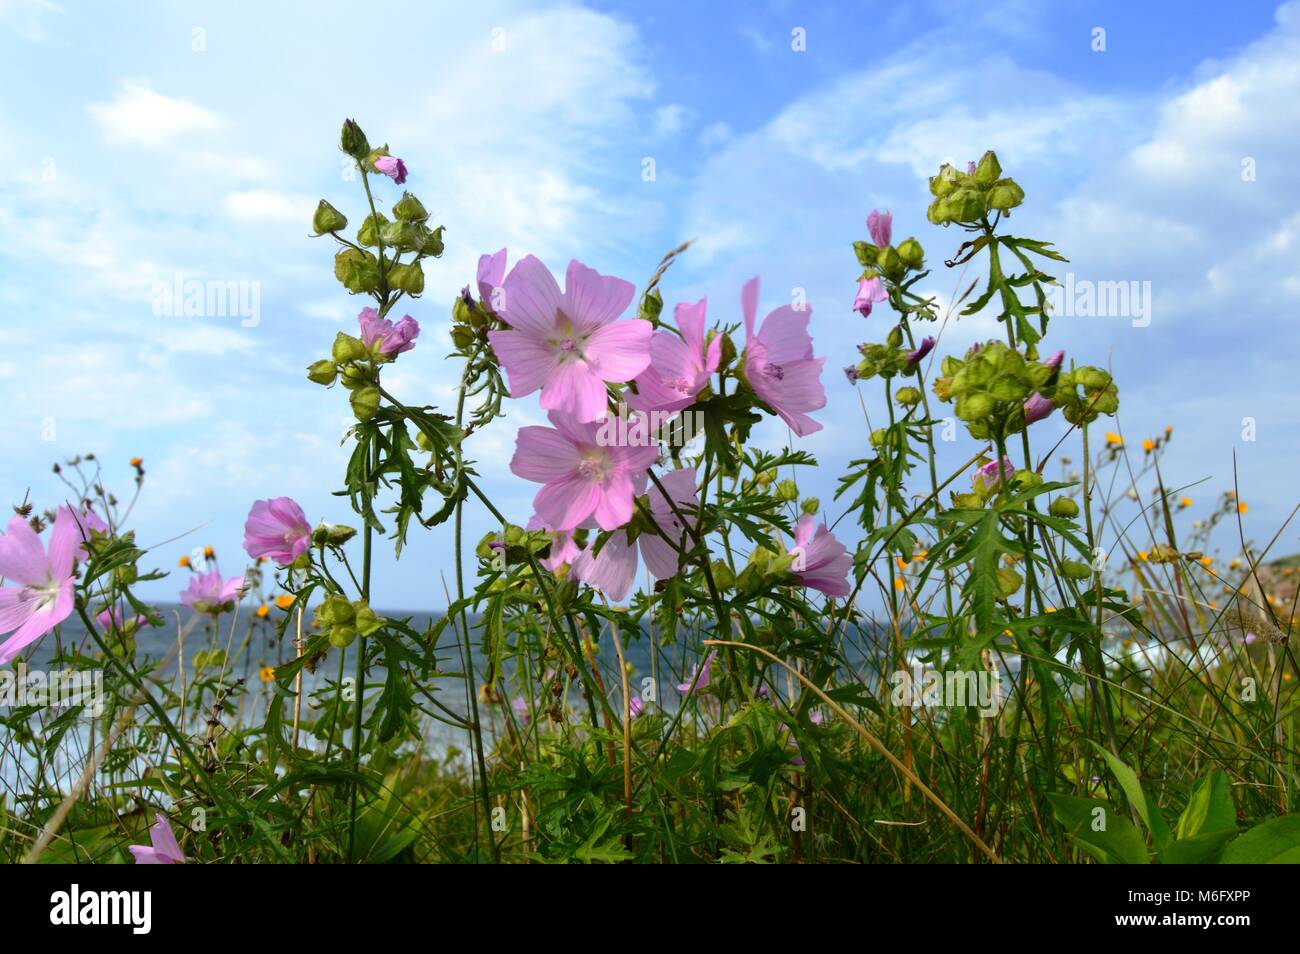 hairy willow herb Stock Photo